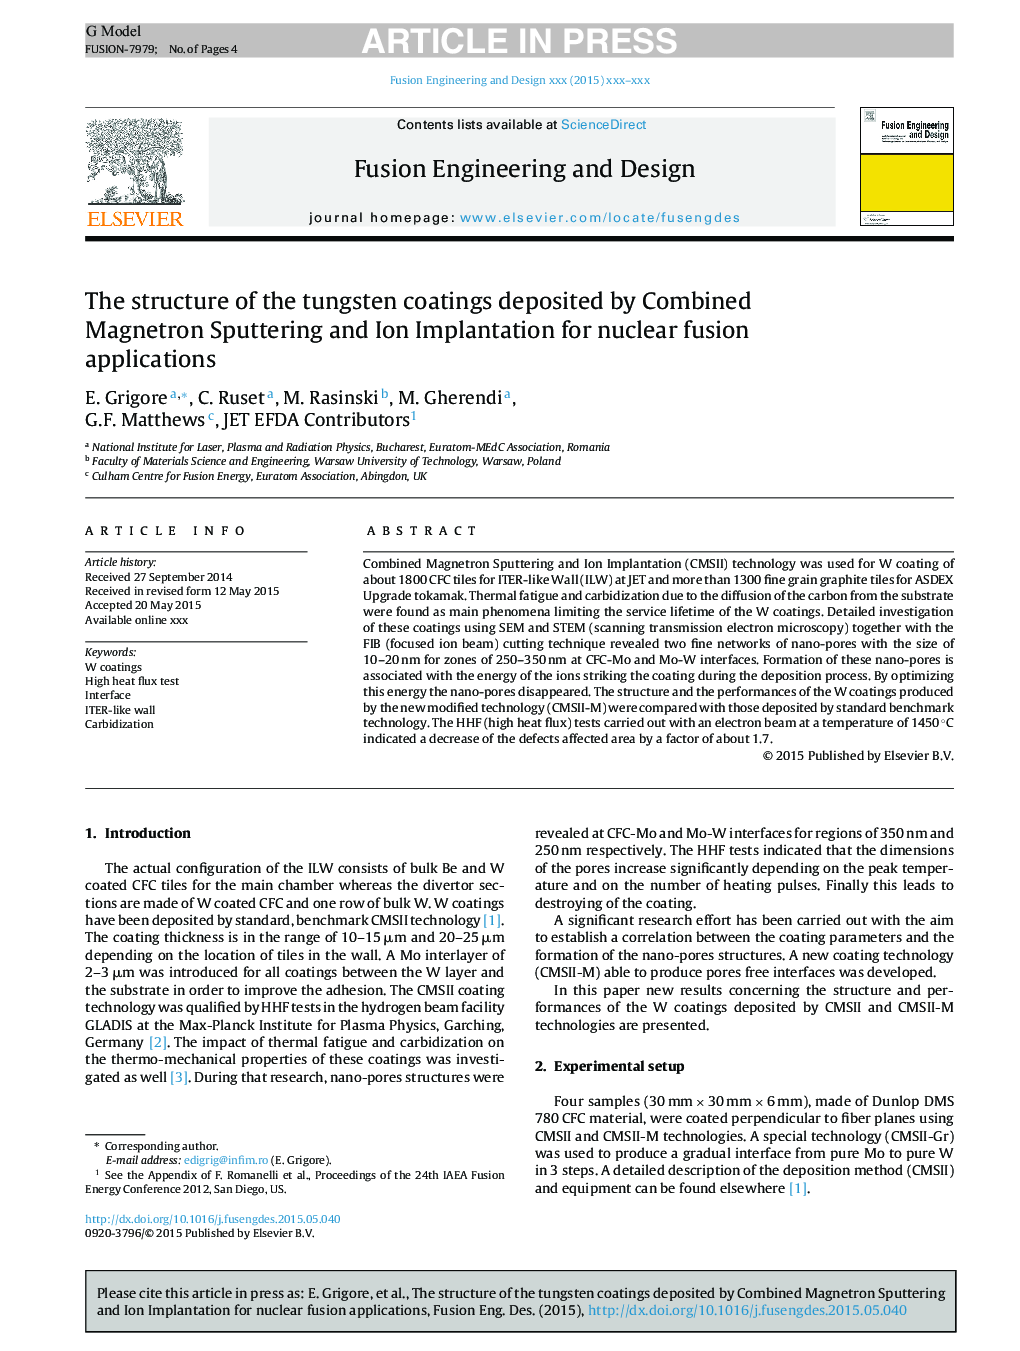 The structure of the tungsten coatings deposited by Combined Magnetron Sputtering and Ion Implantation for nuclear fusion applications